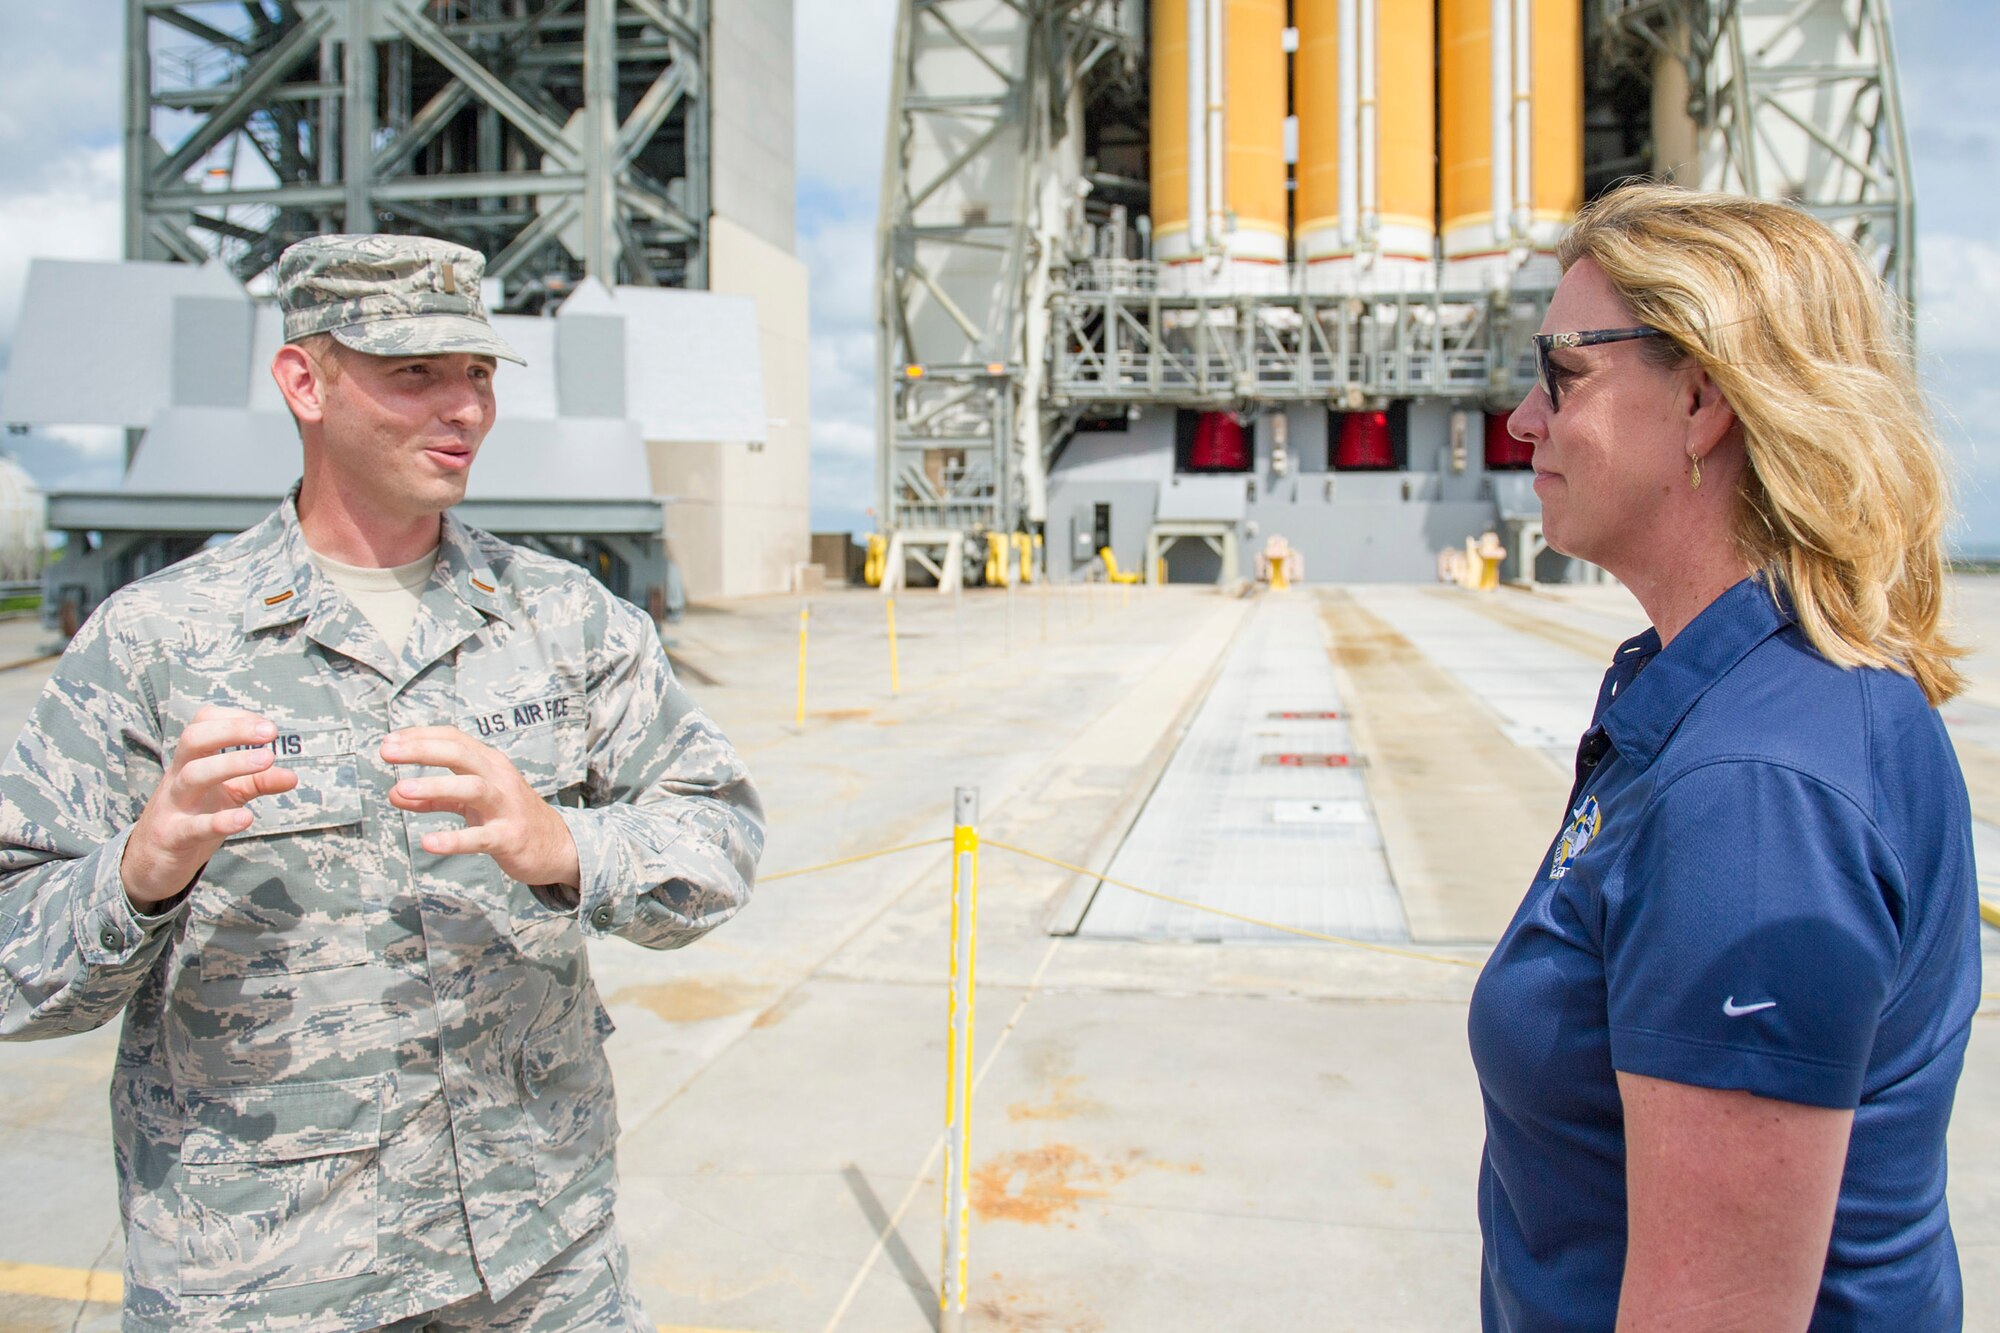 Second Lt. Heath Curtis, 5th Space Launch Squadron, gives Secretary of the Air Force Deborah Lee James a Delta rocket booster processing briefing, during a tour of Cape Canaveral Air Force Station, Fla., Oct. 15, 2014.  The daylong visit included tours of Air Force Eastern Range launch assets as well as a windshield tour of NASA’s Kennedy Space Center.  (U.S. Air Force photo/Matthew Jurgens)